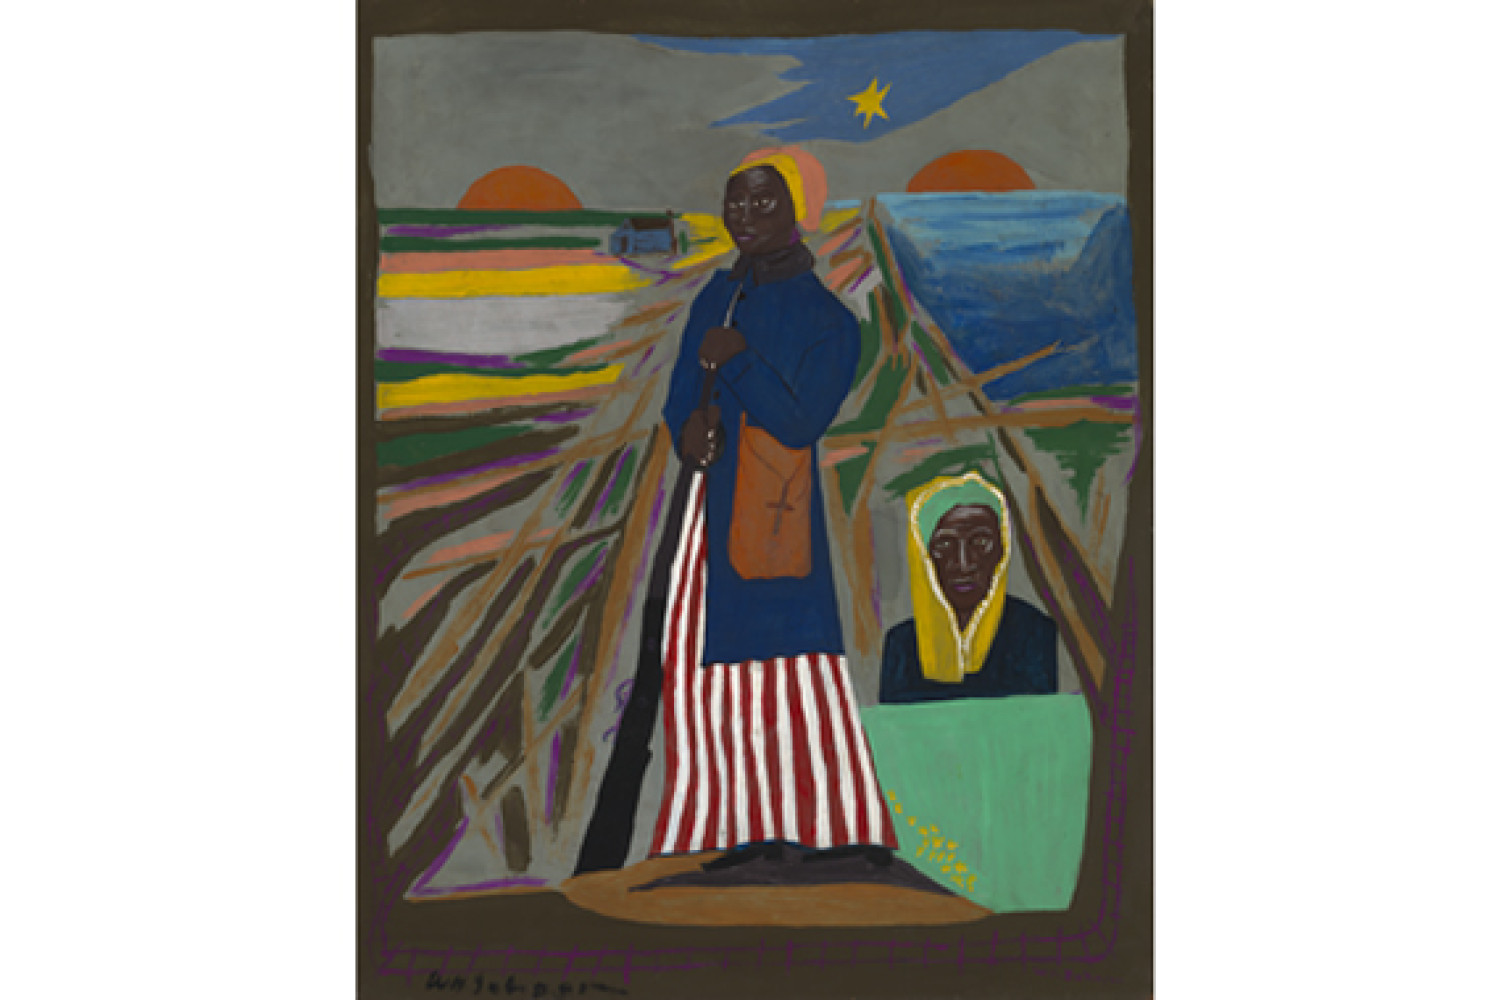 Harriet Tubman, ca. 1945, by William H. Johnson (American, 1901-1970). Oil on paperboard, 28 7/8 x 23 3/8 inches. Image courtesy of Smithsonian American Art Museum.